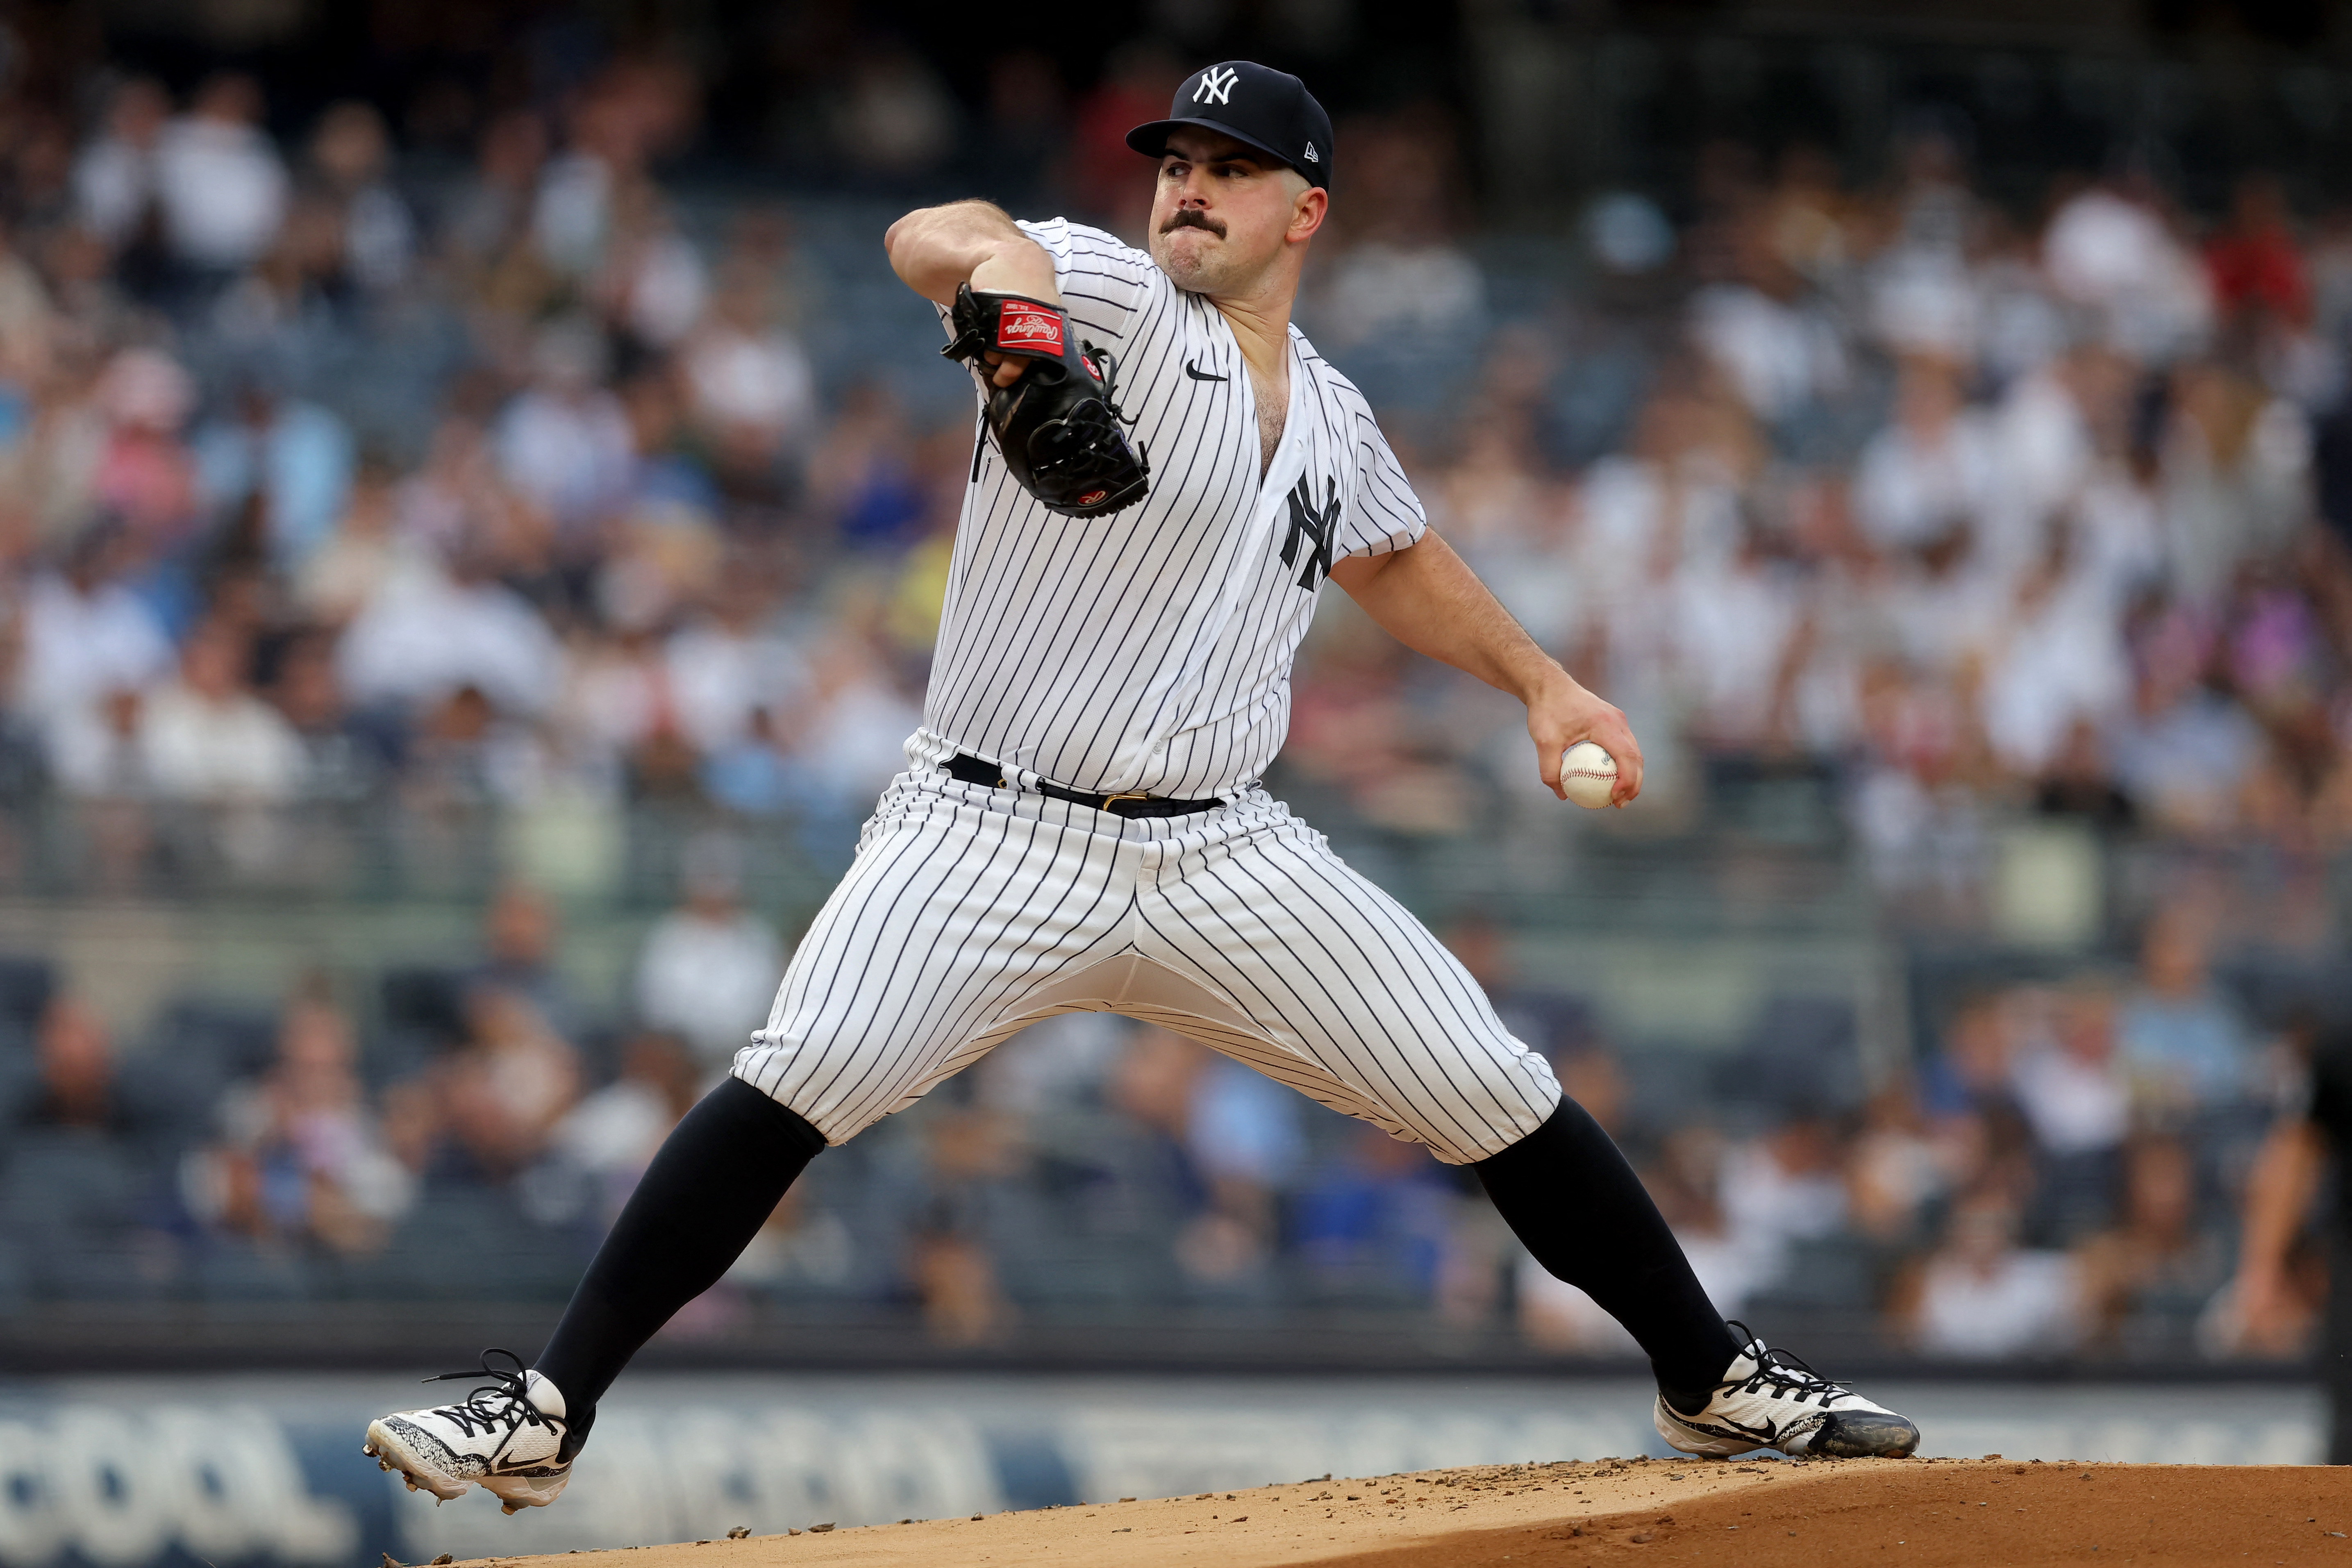 New York Yankees: 5 things to know about new pitcher Jameson Taillon